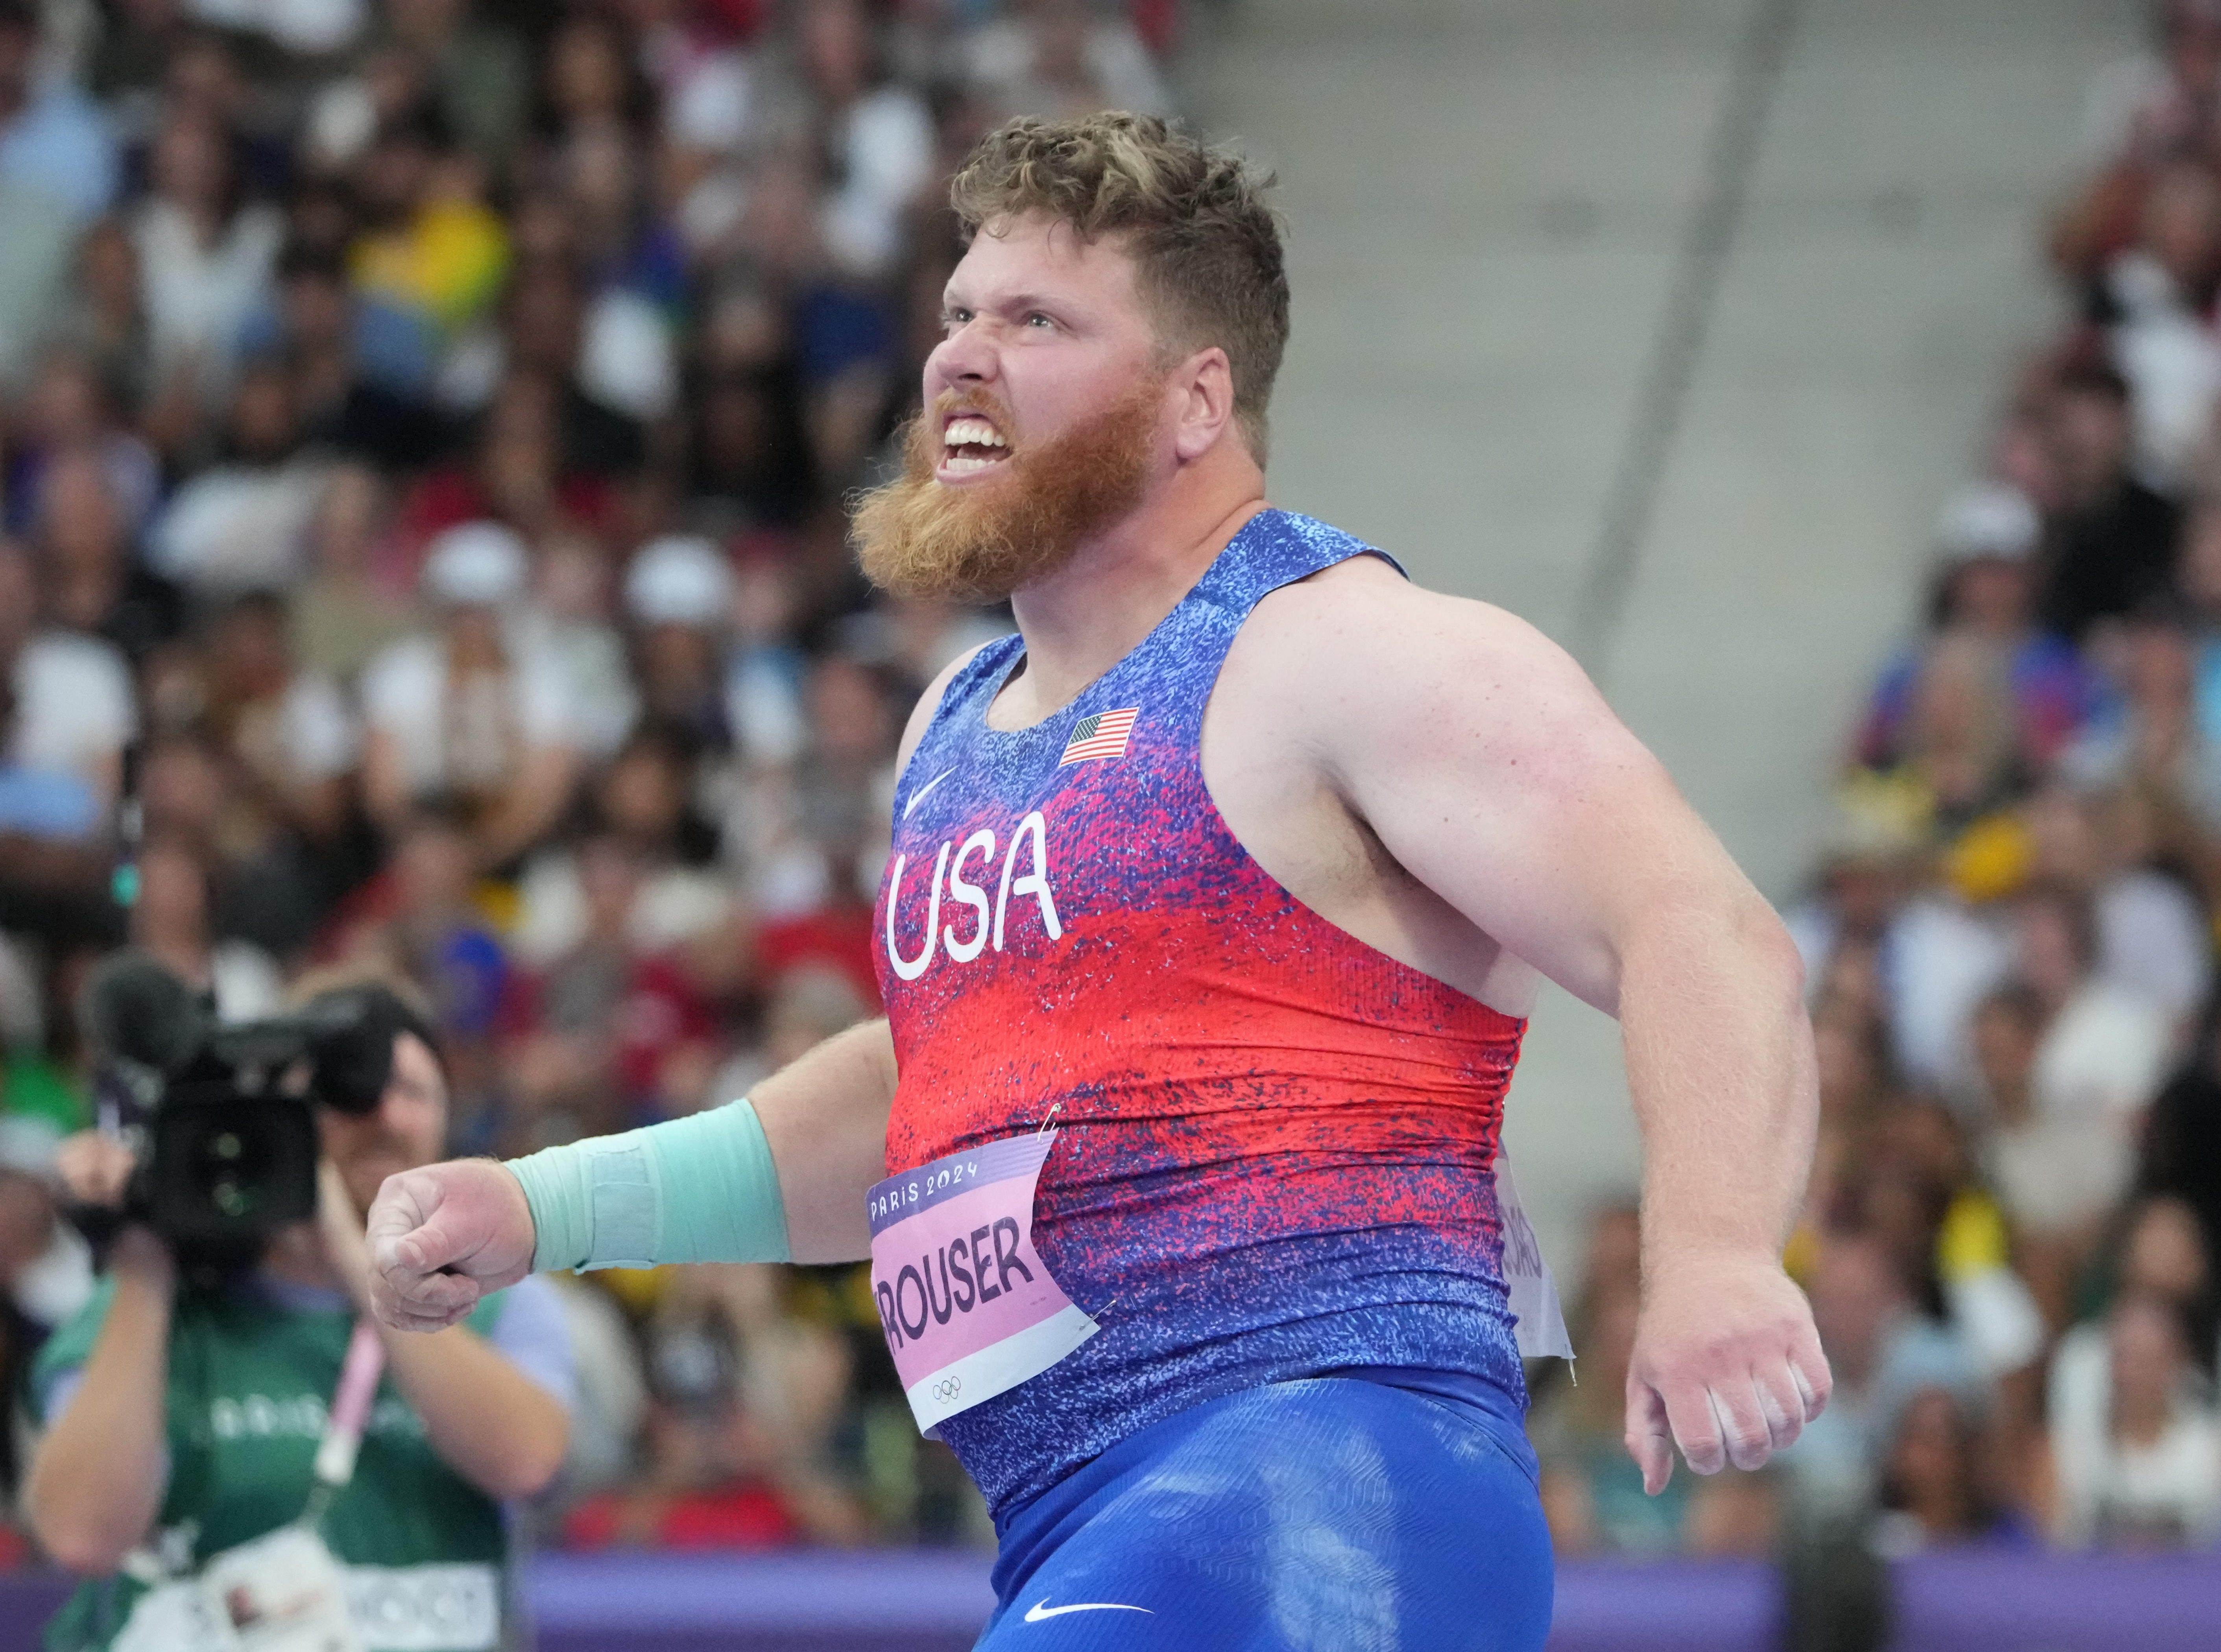 Oregon native Ryan Crouser becomes first to win 3 gold medals in men's shot put